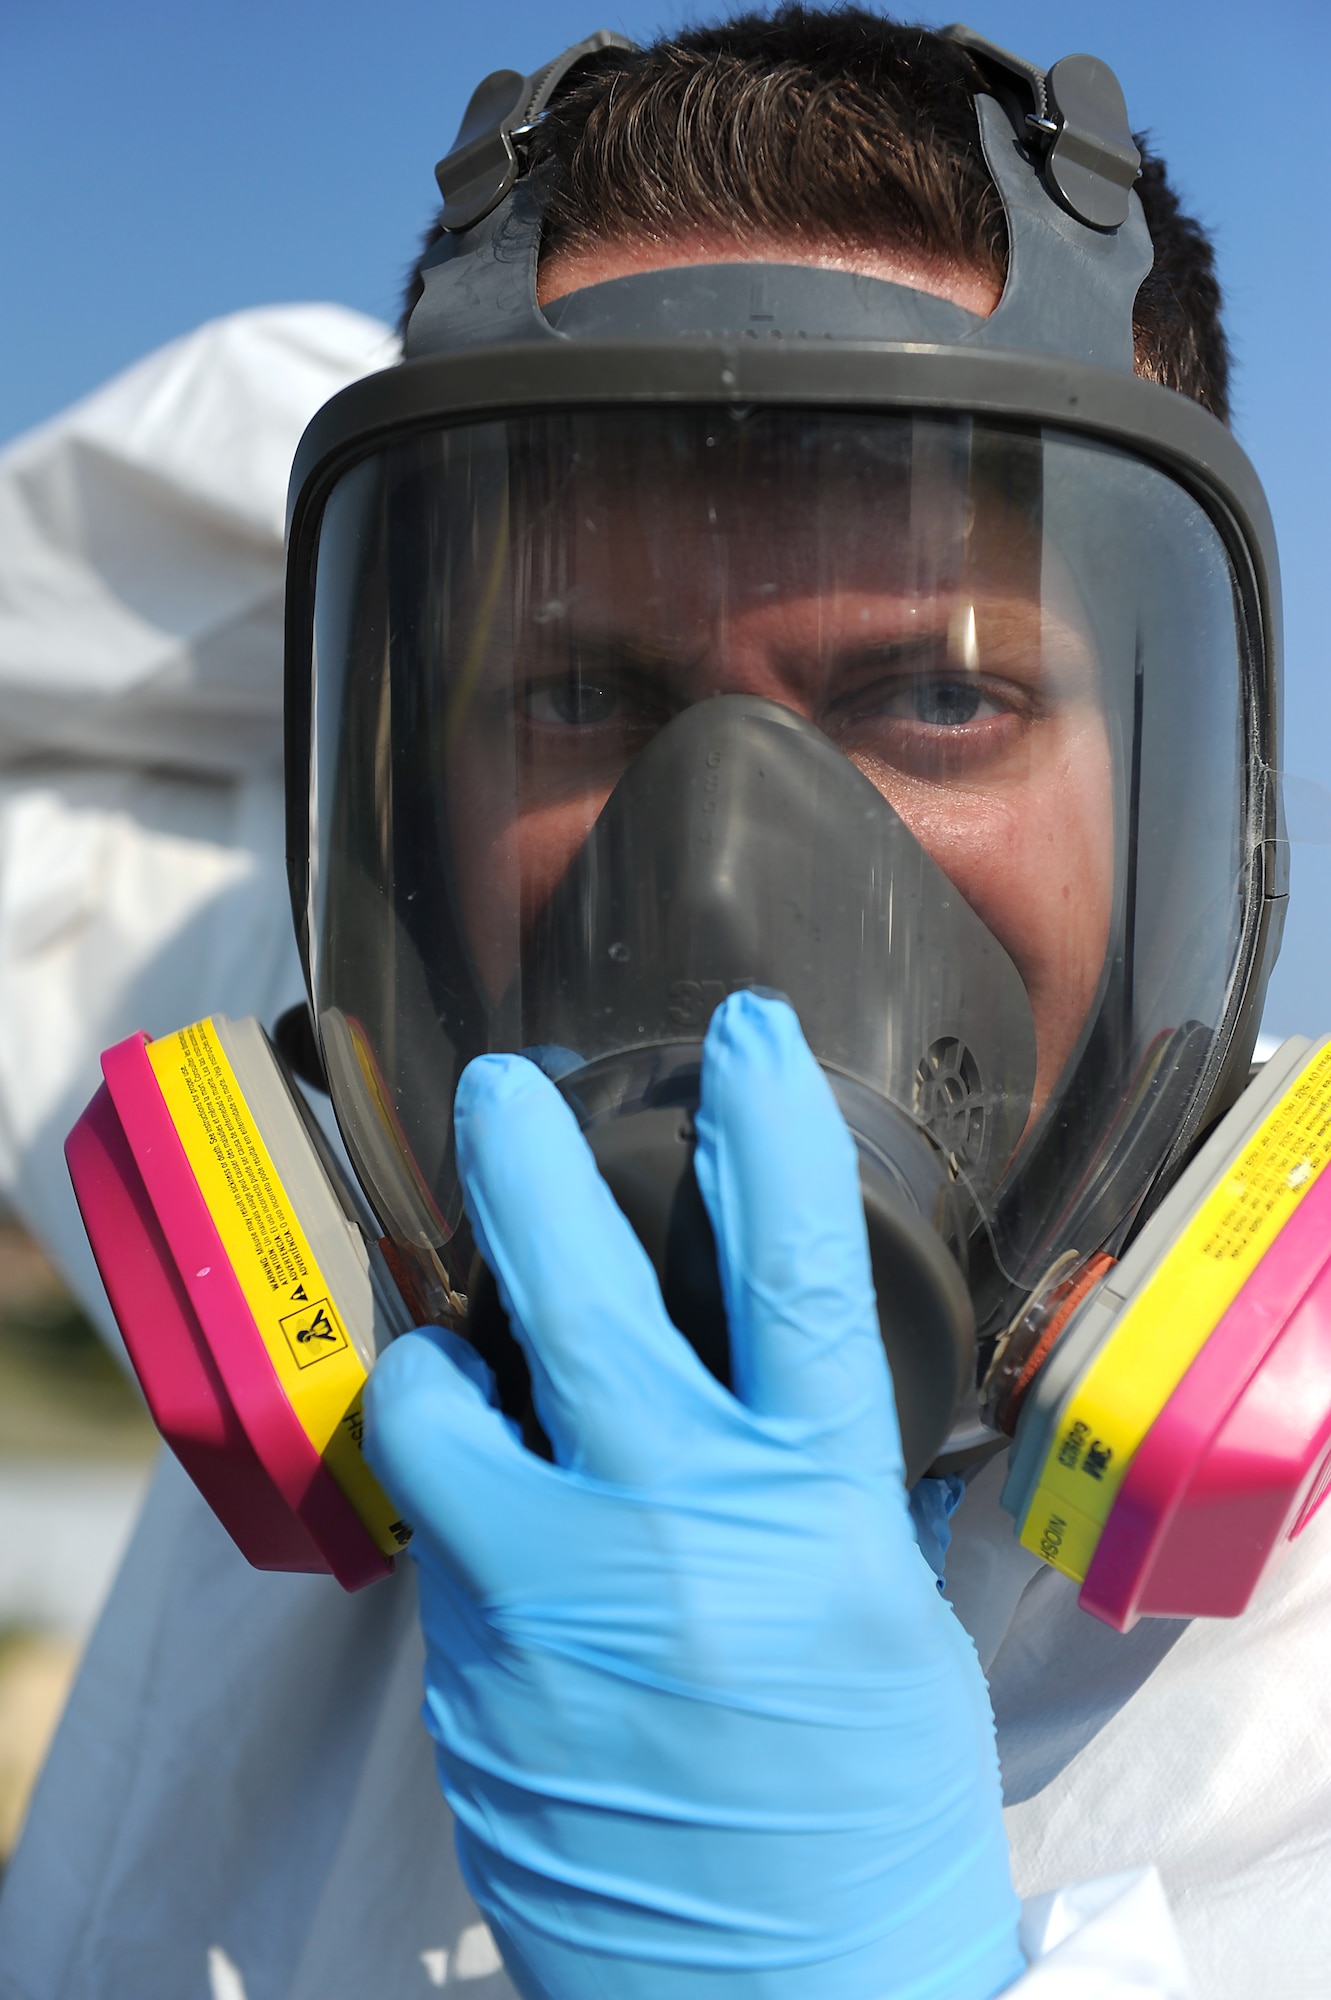 Tech. Sgt. Nicholas Fonzo, 509th Maintenance Squadron low observable technician, dons his respirator mask prior to performing maintenance on a Minuteman II Missile static display Sept. 1, 2015, at Whiteman Air Force Base, Mo. In addition to aircraft painting and other normal duties, low observable technicians perform cosmetic maintenance on static displays at Whiteman. (U.S. Air Force photo by Airman 1st Class Michaela R. Slanchik/Released)